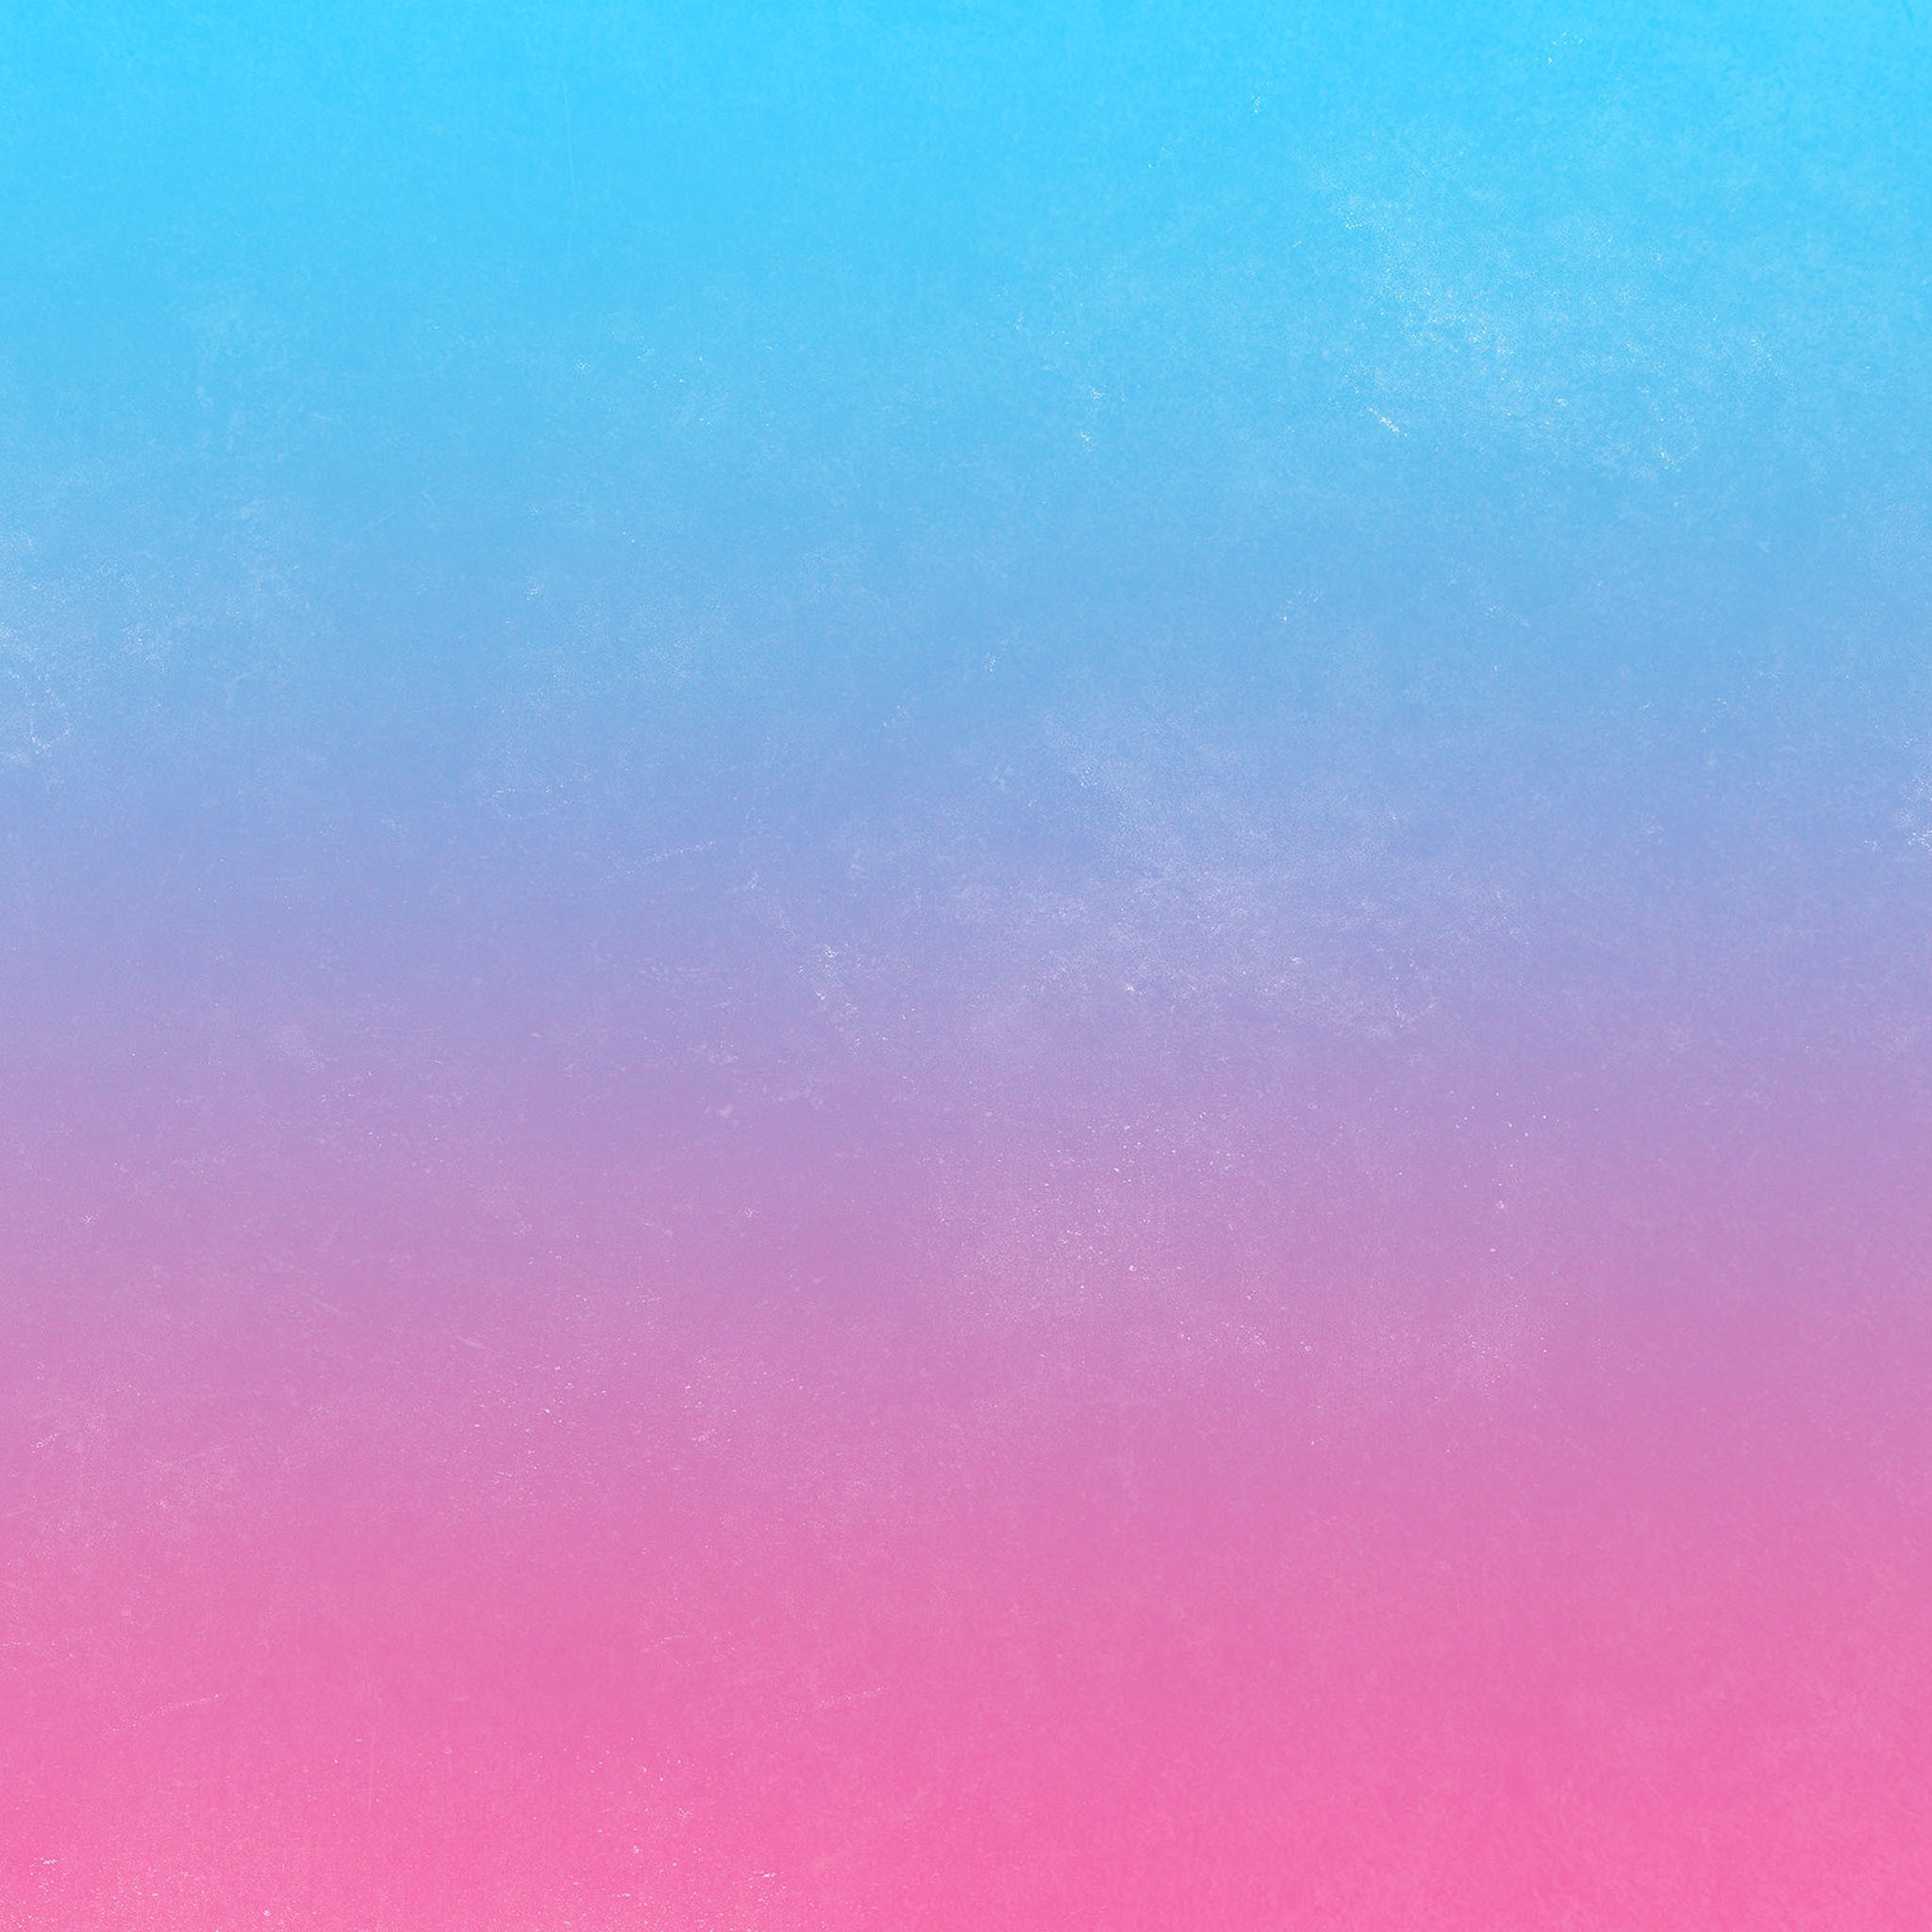 2048x2048 Awesome Baby Blue Pink Horizontal Gradient iPad Wallpaper HD